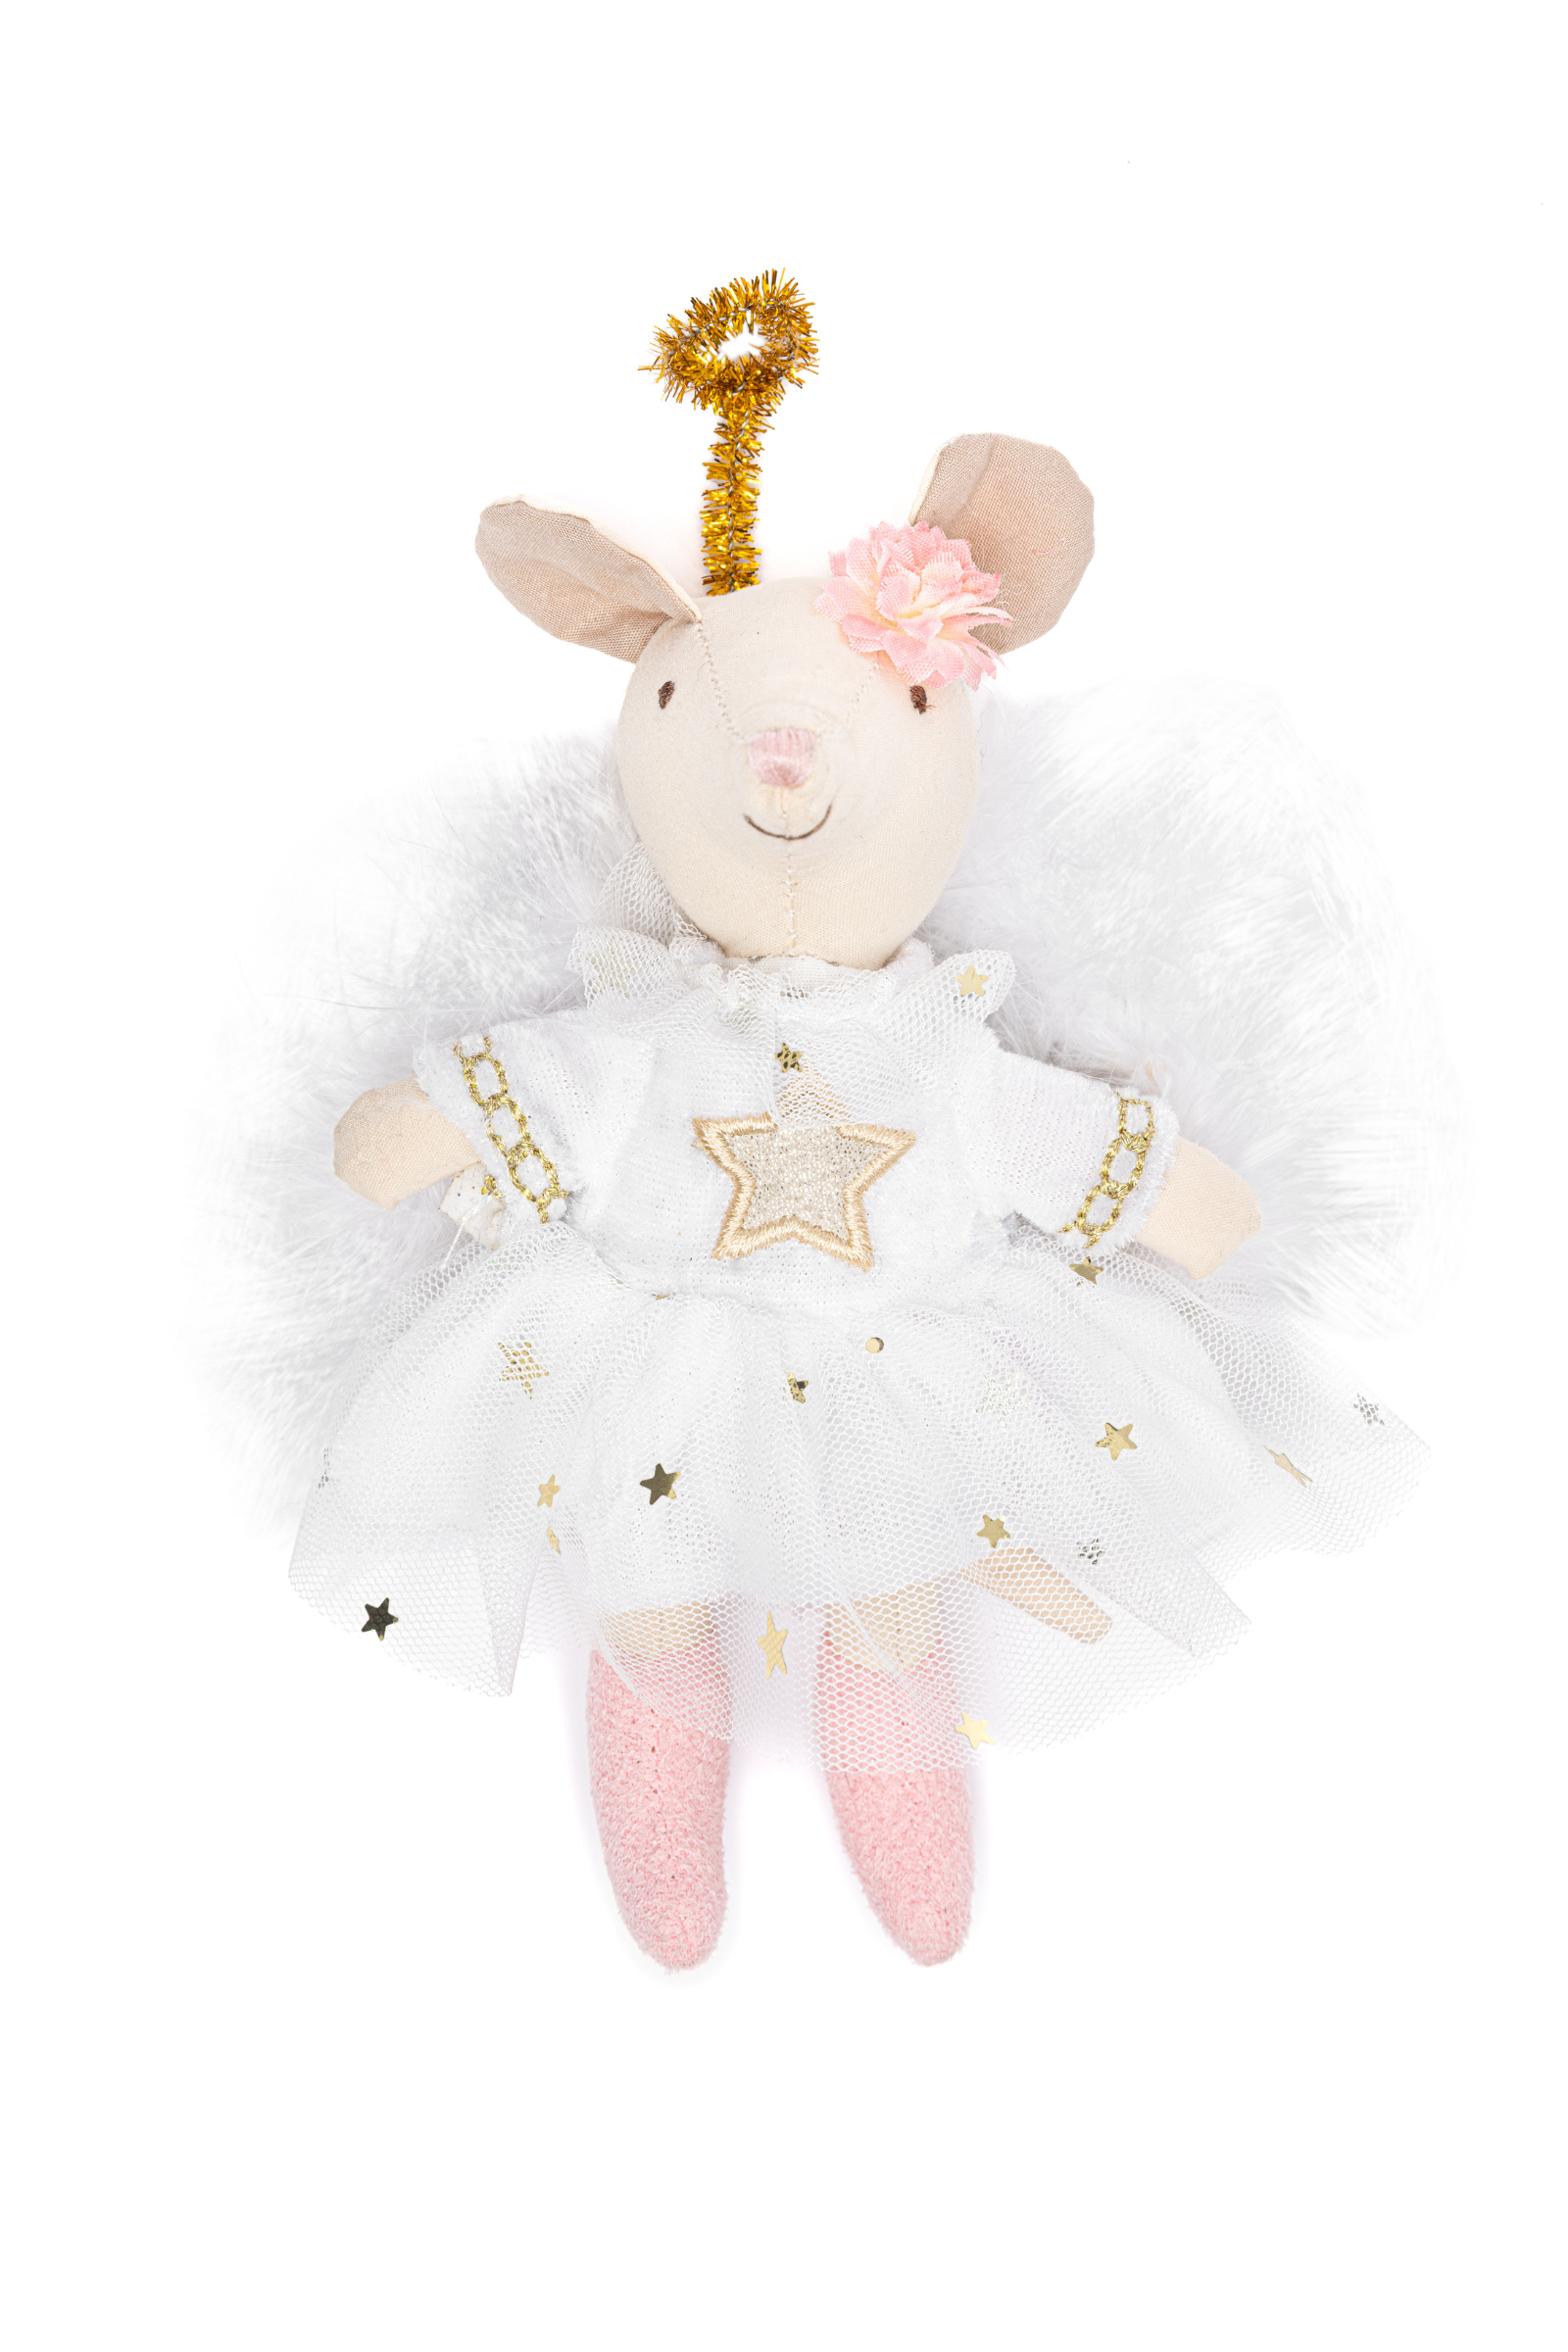 Evangeline The Angel Mouse Mini Doll